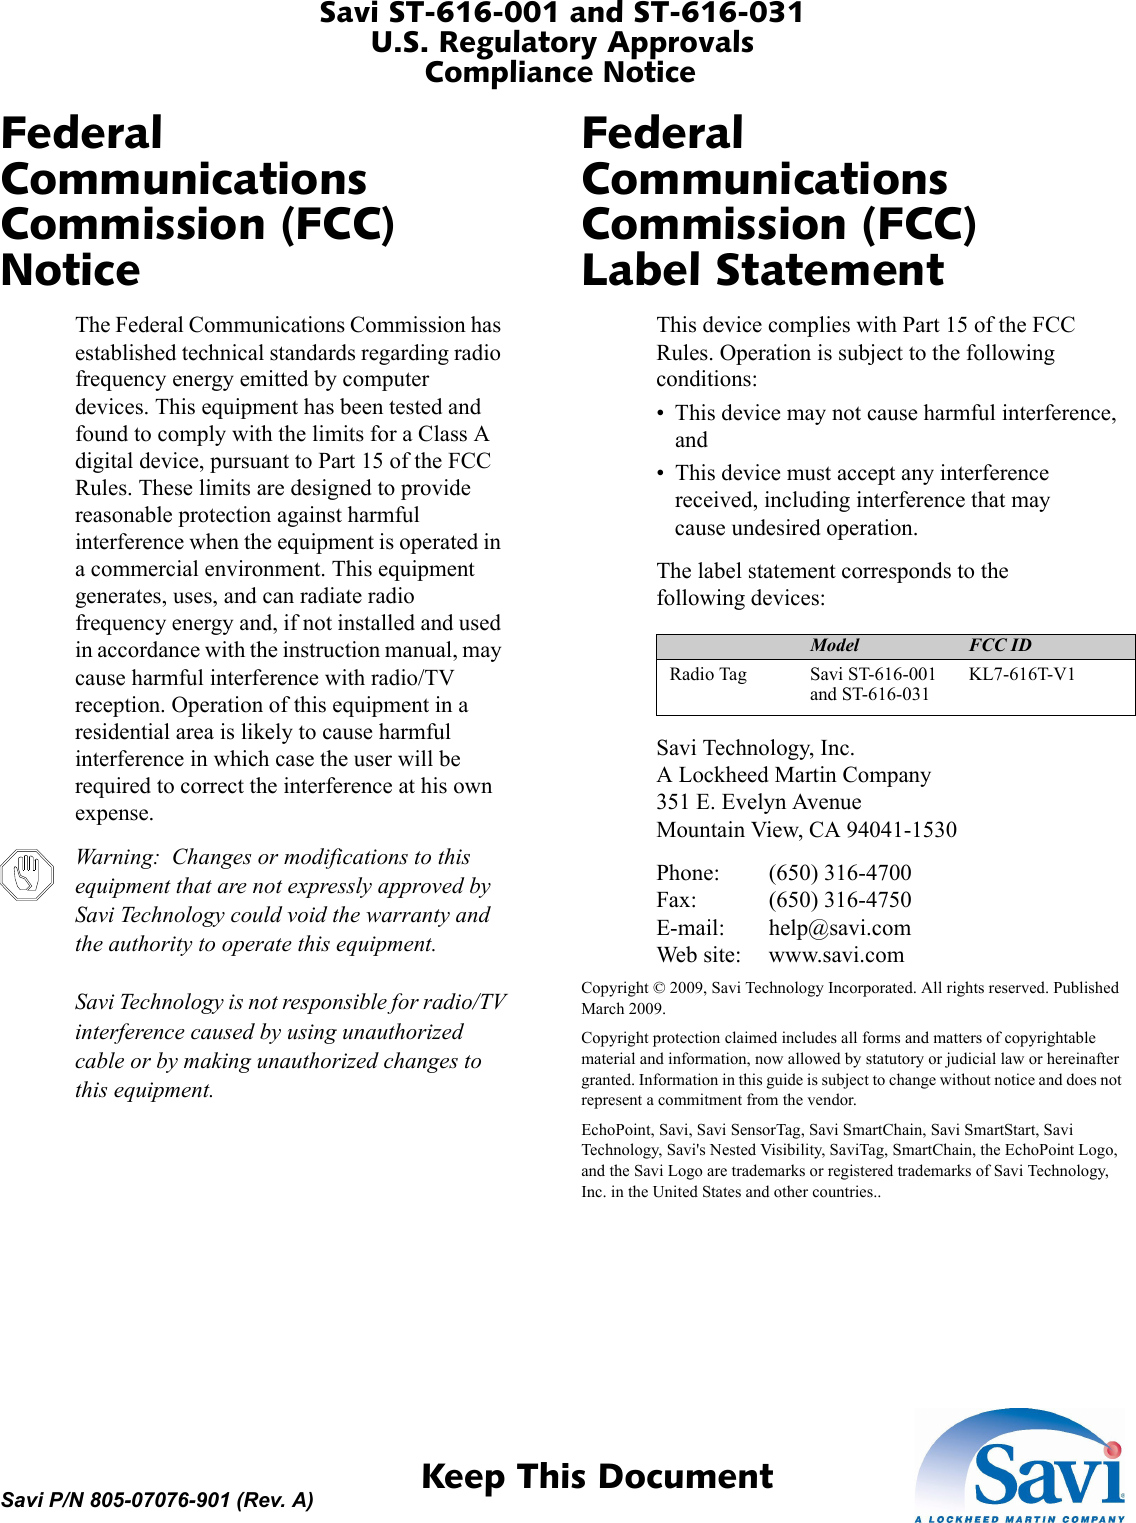 Savi ST-616-001 and ST-616-031U.S. Regulatory ApprovalsCompliance Notice 1  Keep This DocumentSavi P/N 805-07076-901 (Rev. A)Federal Communications Commission (FCC) NoticeThe Federal Communications Commission has established technical standards regarding radio frequency energy emitted by computer devices. This equipment has been tested and found to comply with the limits for a Class A digital device, pursuant to Part 15 of the FCC Rules. These limits are designed to provide reasonable protection against harmful interference when the equipment is operated in a commercial environment. This equipment generates, uses, and can radiate radio frequency energy and, if not installed and used in accordance with the instruction manual, may cause harmful interference with radio/TV reception. Operation of this equipment in a residential area is likely to cause harmful interference in which case the user will be required to correct the interference at his own expense.Warning:  Changes or modifications to this equipment that are not expressly approved by Savi Technology could void the warranty and the authority to operate this equipment.  Savi Technology is not responsible for radio/TV interference caused by using unauthorized cable or by making unauthorized changes to this equipment.Federal Communications Commission (FCC) Label StatementThis device complies with Part 15 of the FCC Rules. Operation is subject to the following conditions:• This device may not cause harmful interference, and• This device must accept any interference received, including interference that may cause undesired operation.Device Model FCC IDRadio Tag Savi ST-616-001 and ST-616-031KL7-616T-V1The label statement corresponds to the following devices:Savi Technology, Inc. A Lockheed Martin Company 351 E. Evelyn Avenue Mountain View, CA 94041-1530Phone: (650) 316-4700 Fax: (650) 316-4750 E-mail: help@savi.com Web site: www.savi.comCopyright © 2009, Savi Technology Incorporated. All rights reserved. Published March 2009.Copyright protection claimed includes all forms and matters of copyrightable material and information, now allowed by statutory or judicial law or hereinafter granted. Information in this guide is subject to change without notice and does not represent a commitment from the vendor.EchoPoint, Savi, Savi SensorTag, Savi SmartChain, Savi SmartStart, Savi Technology, Savi&apos;s Nested Visibility, SaviTag, SmartChain, the EchoPoint Logo, and the Savi Logo are trademarks or registered trademarks of Savi Technology, Inc. in the United States and other countries..